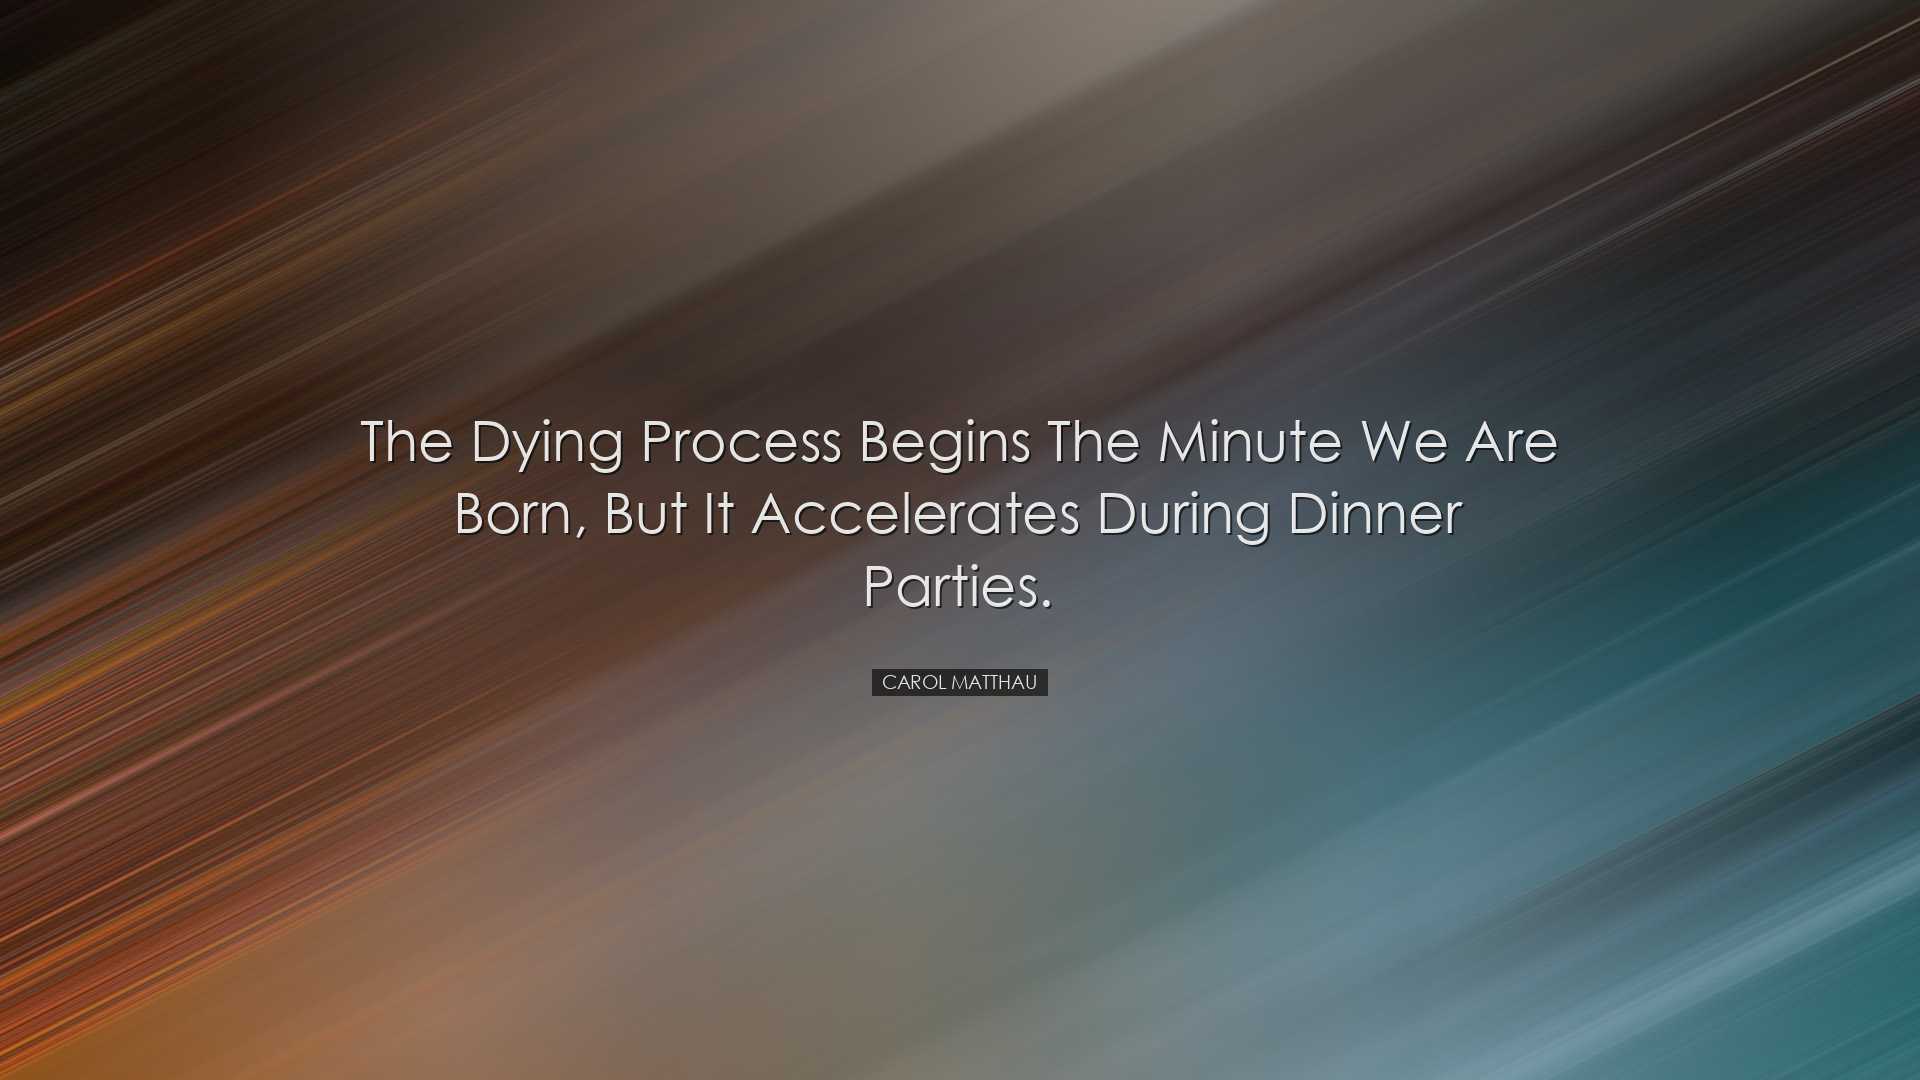 The dying process begins the minute we are born, but it accelerate